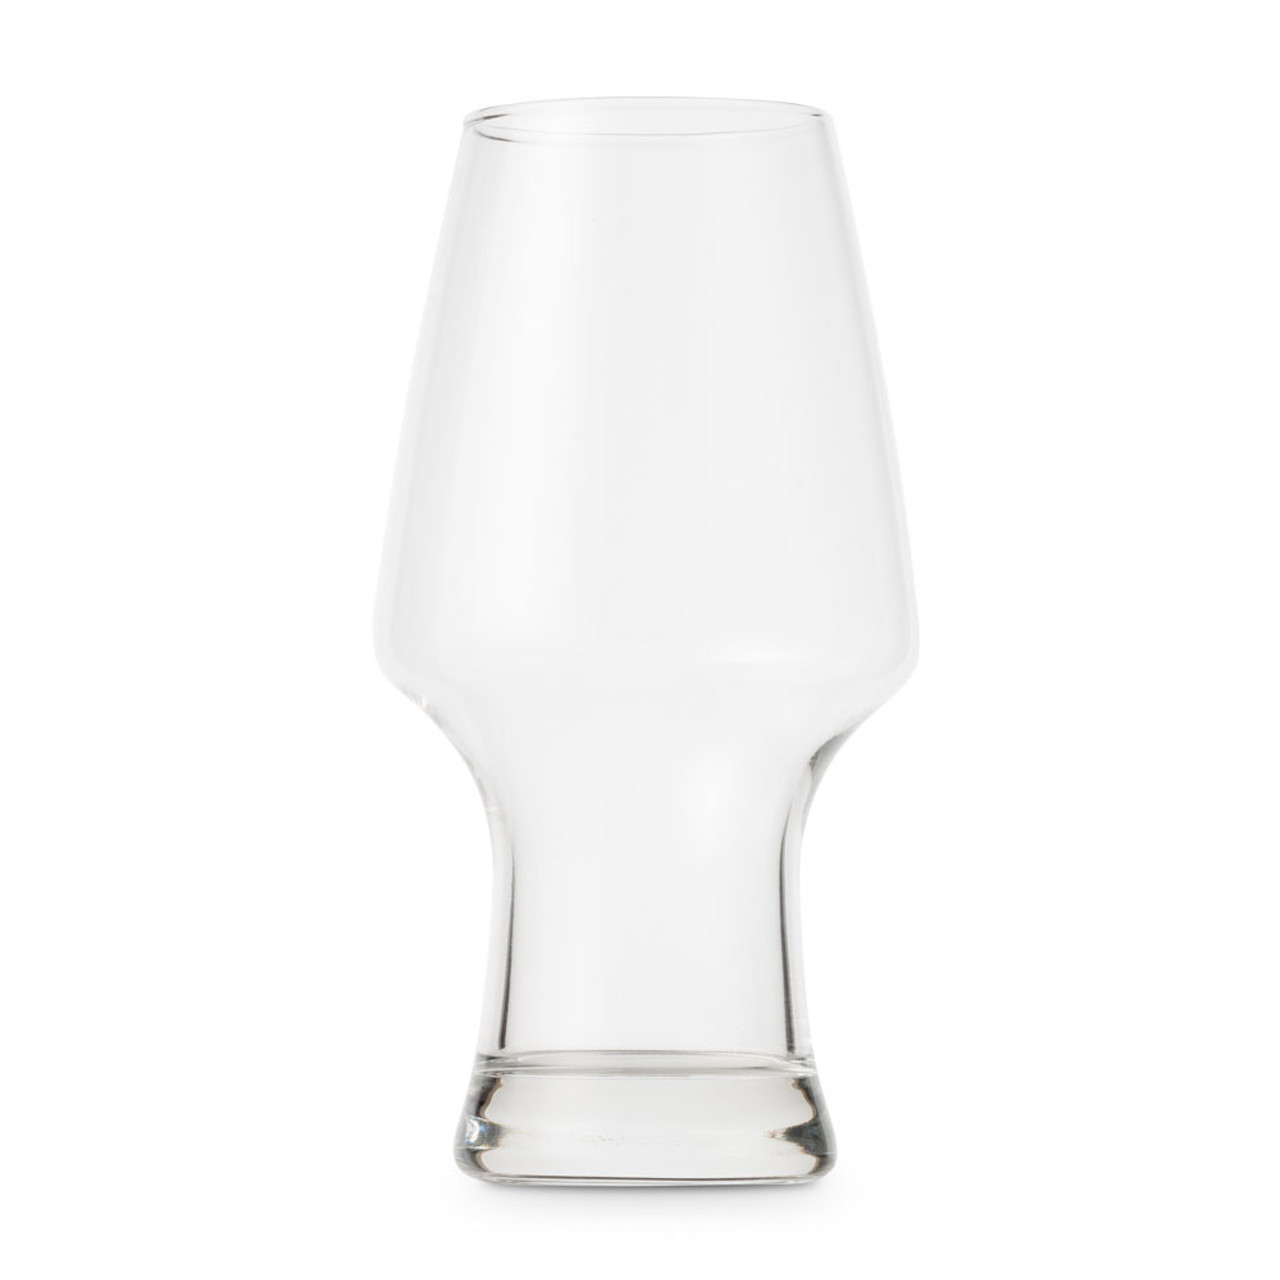 https://cdn11.bigcommerce.com/s-cznxq08r7/images/stencil/1280x1280/products/5459/14759/747863_Anchor_Hocking_Craft_Beer_Glass_Tumbler_-_19_oz_02__72907.1666325411.jpg?c=1